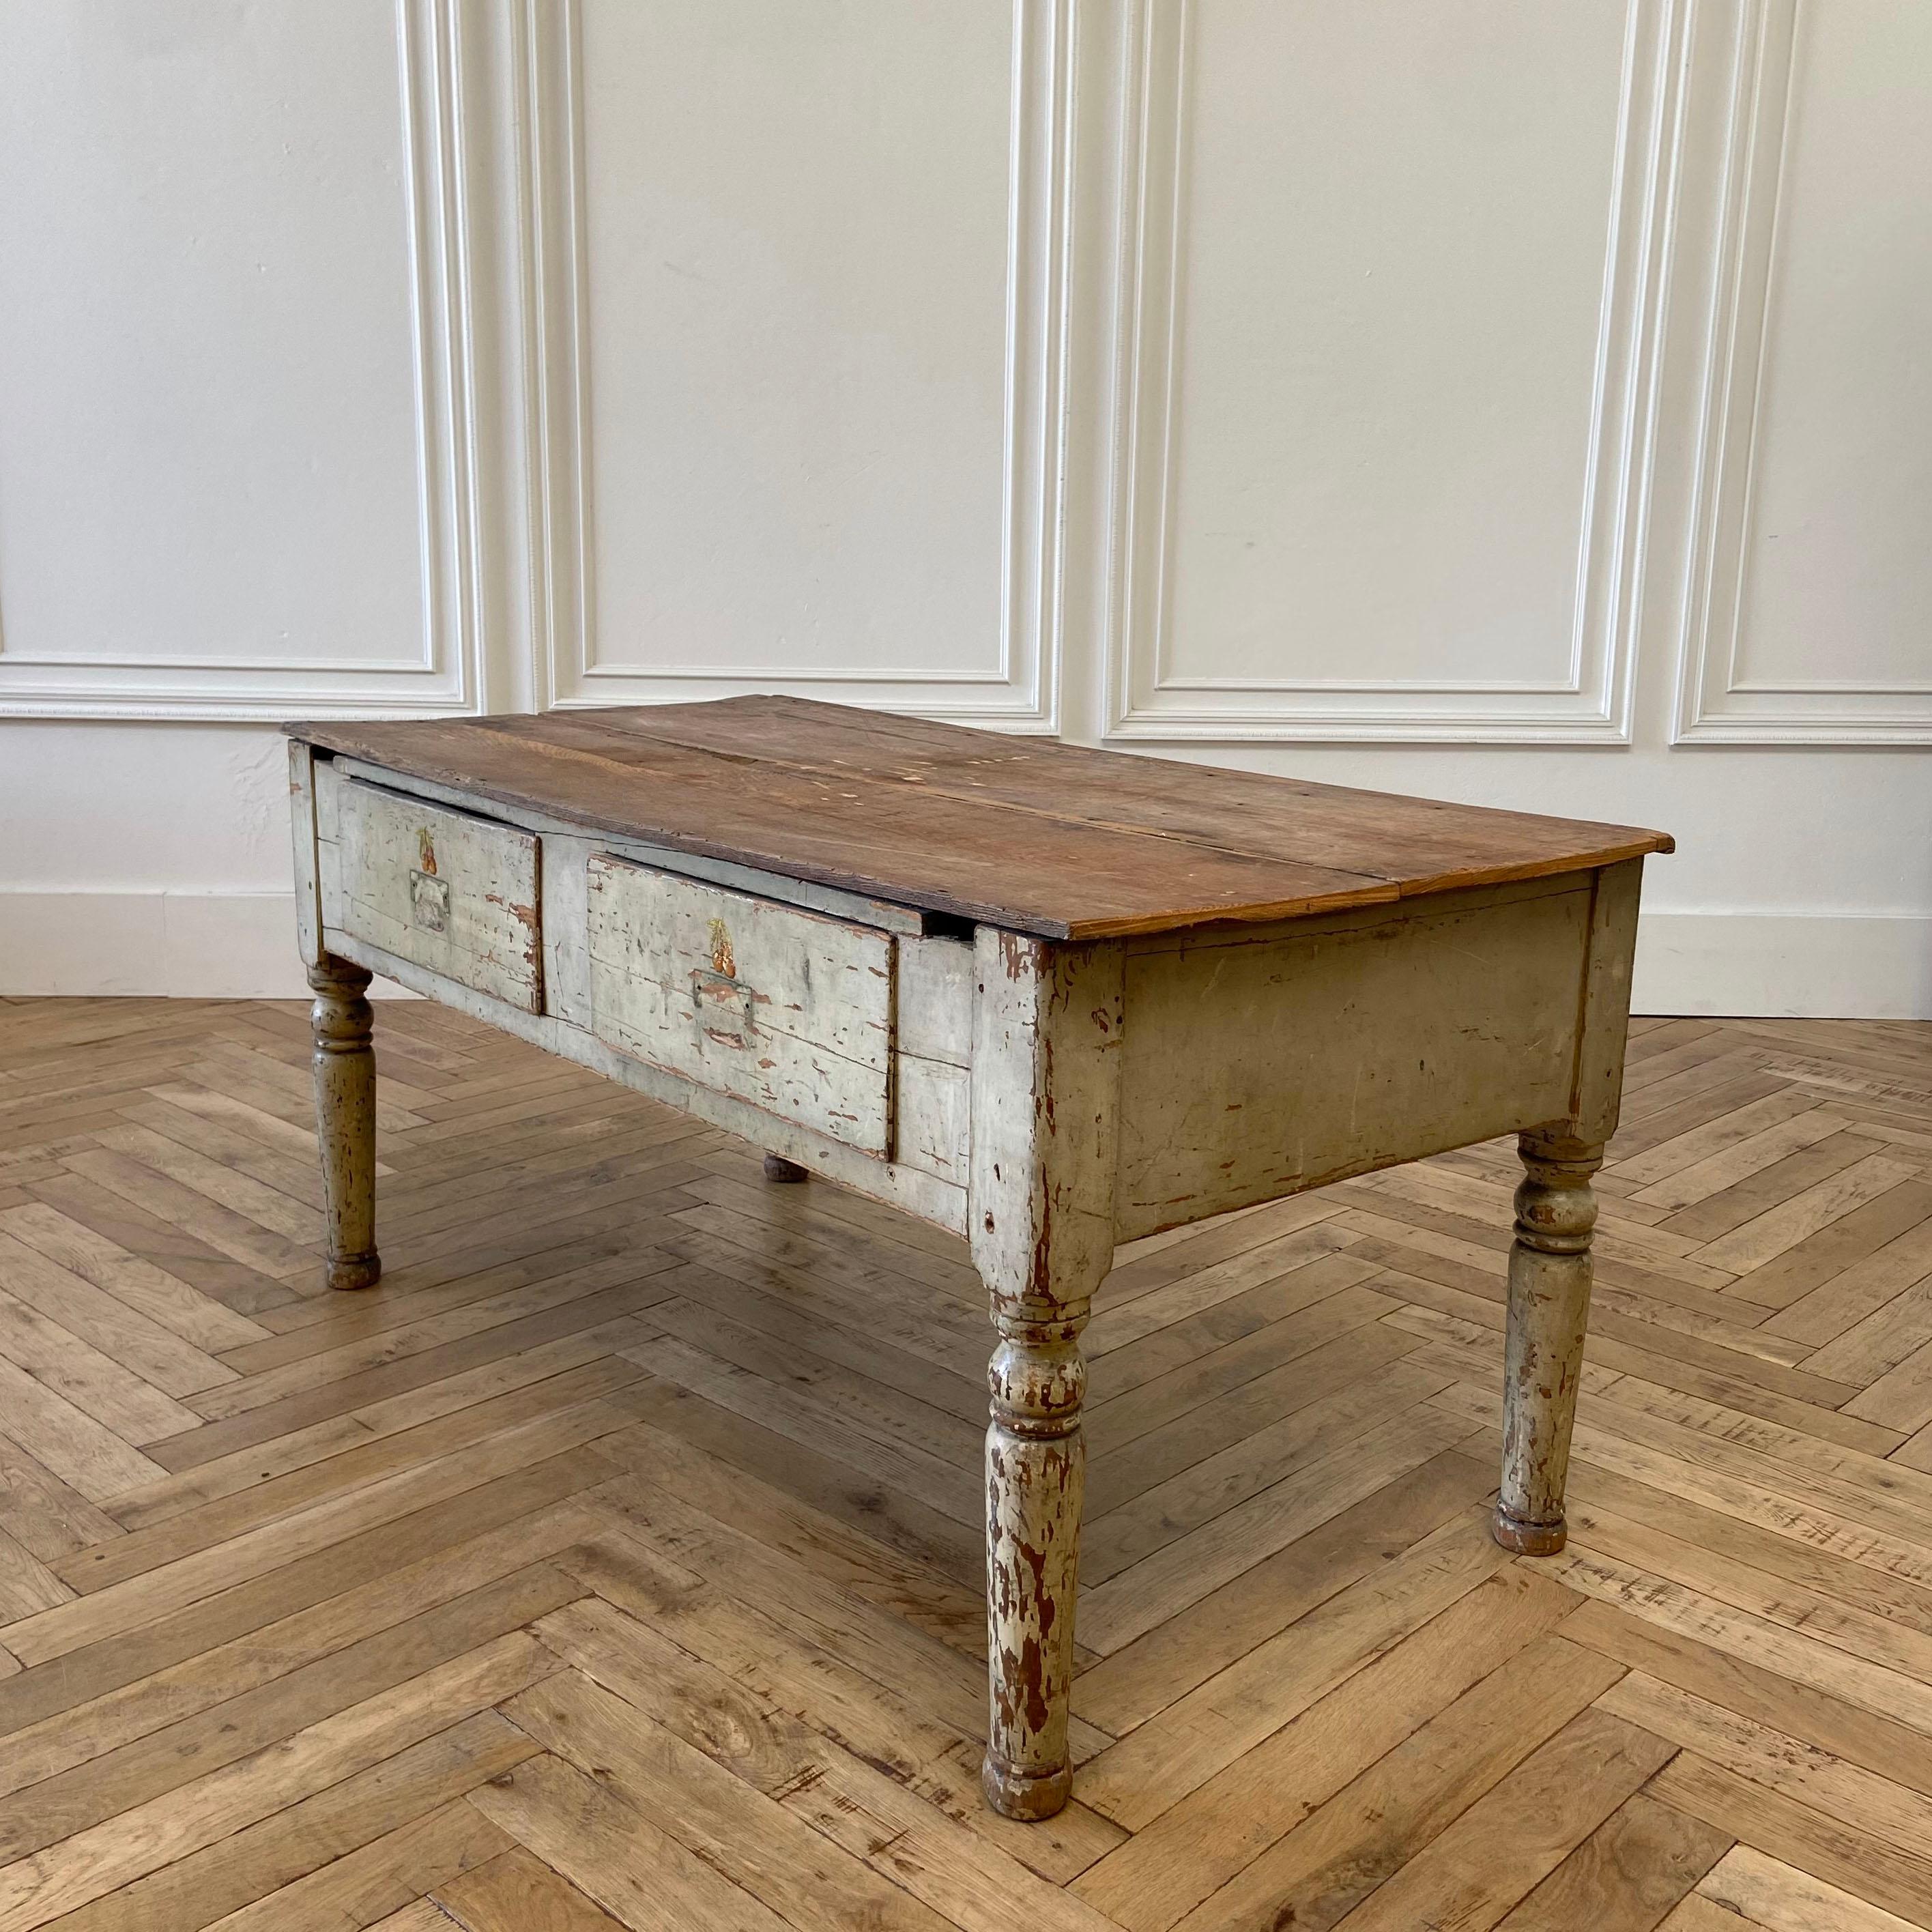 Antique rustic primitive style low table or coffee table.
Original painted legs and finish is very distressed. Drawers open and close with ease, there are stencils on the face of the drawer that can be removed or sanded away if wanted.
The legs